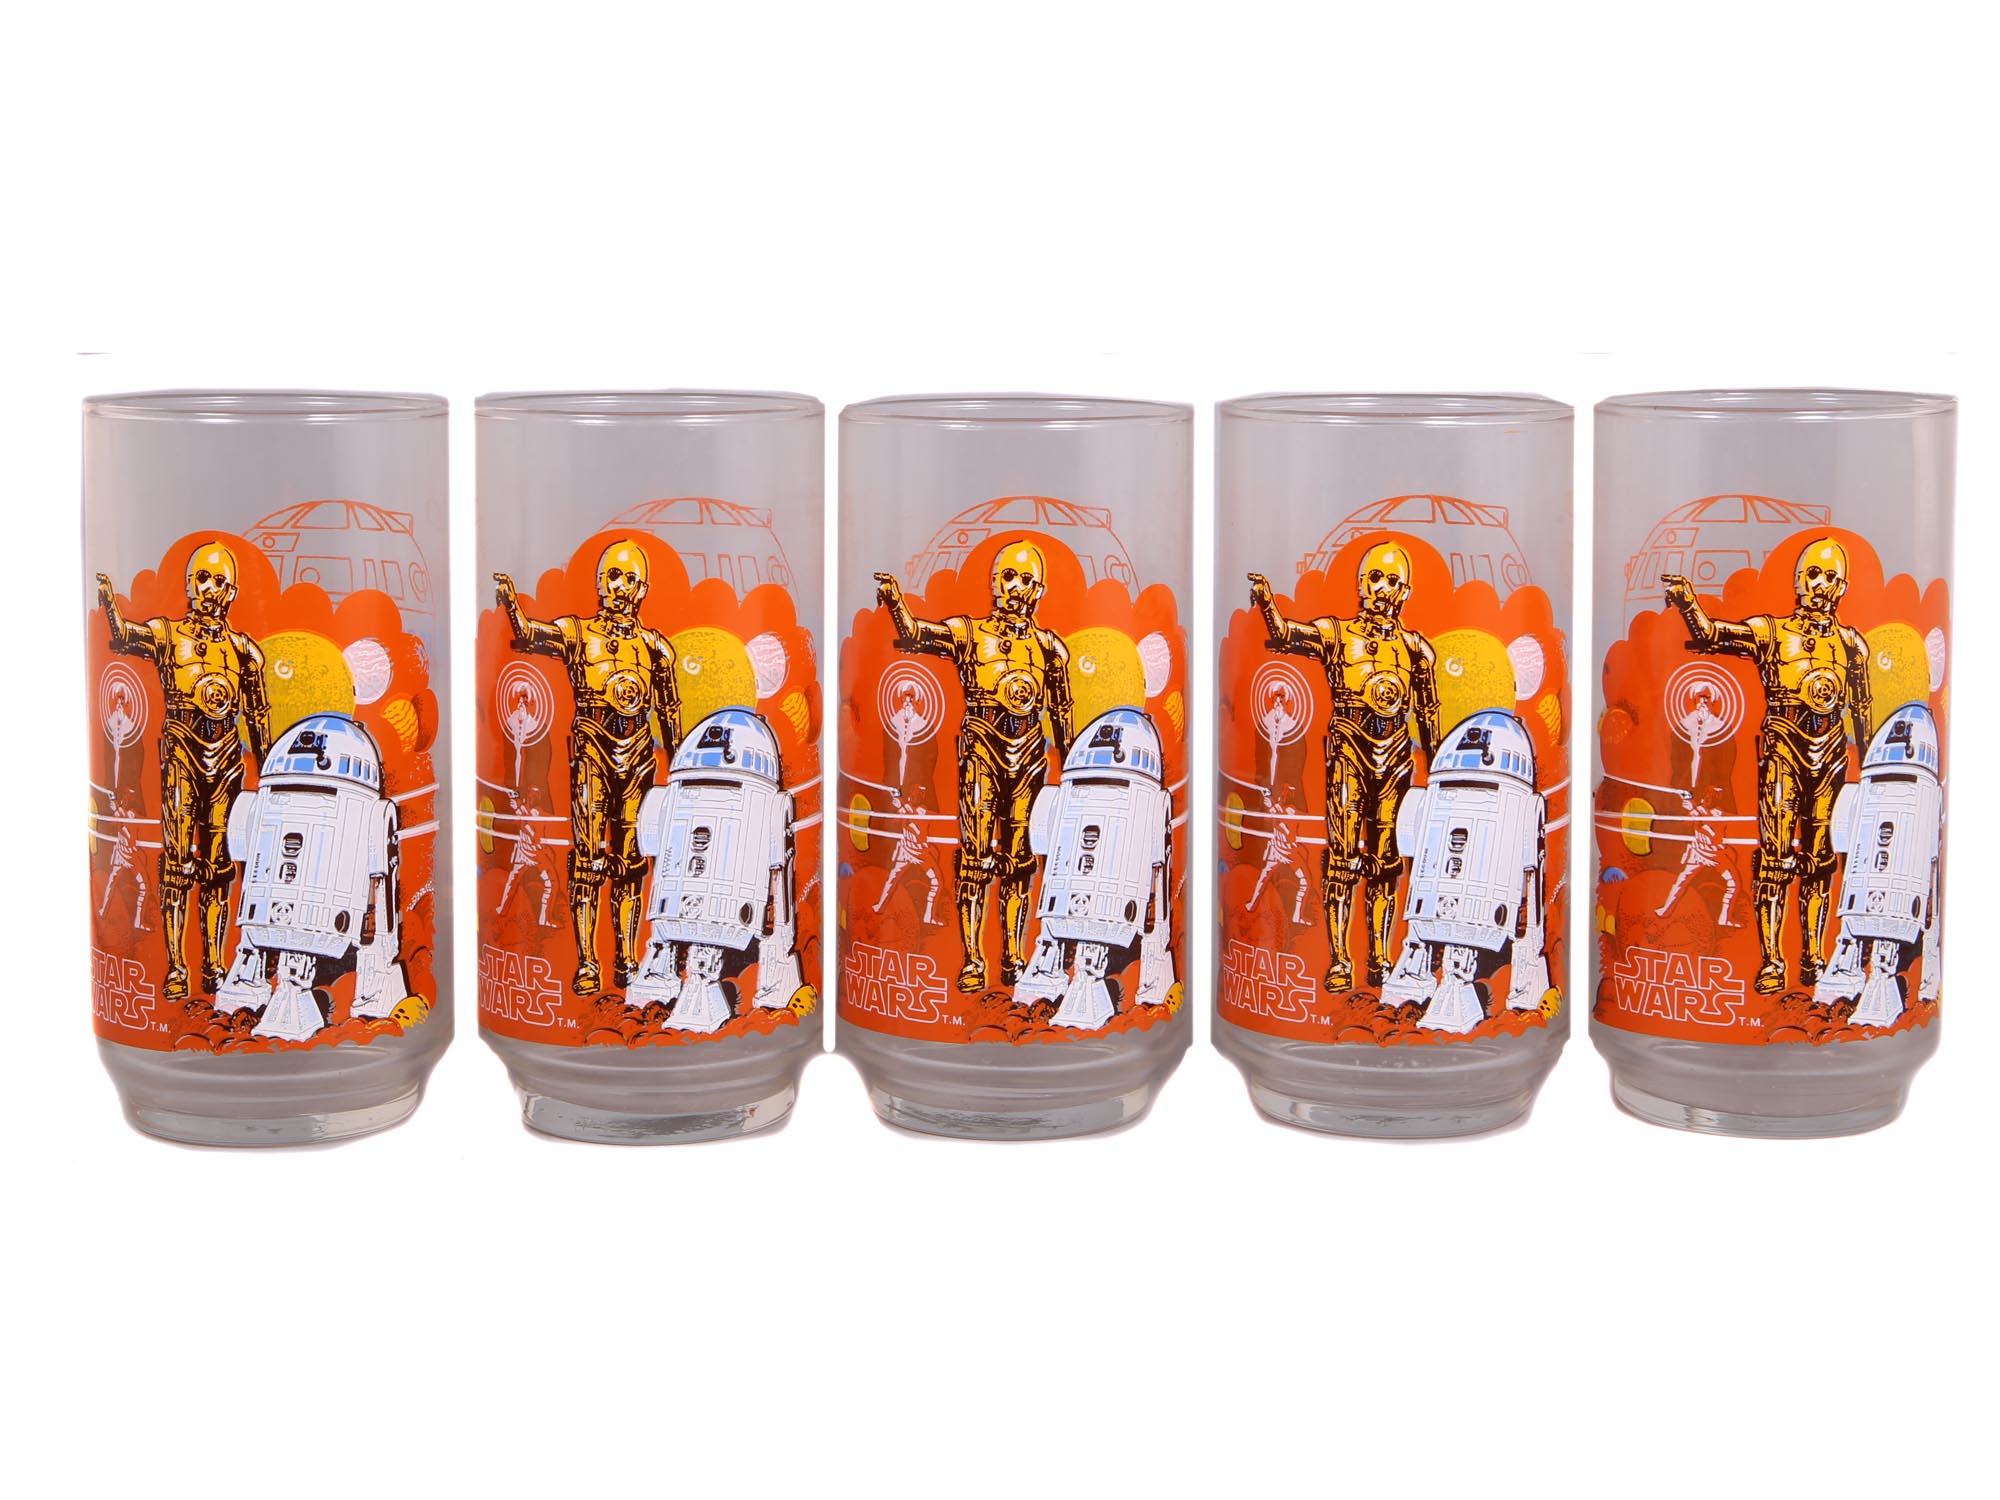 STAR WARS AND DUKE OF DOUBT GLASS SETS VINTAGE PIC-2